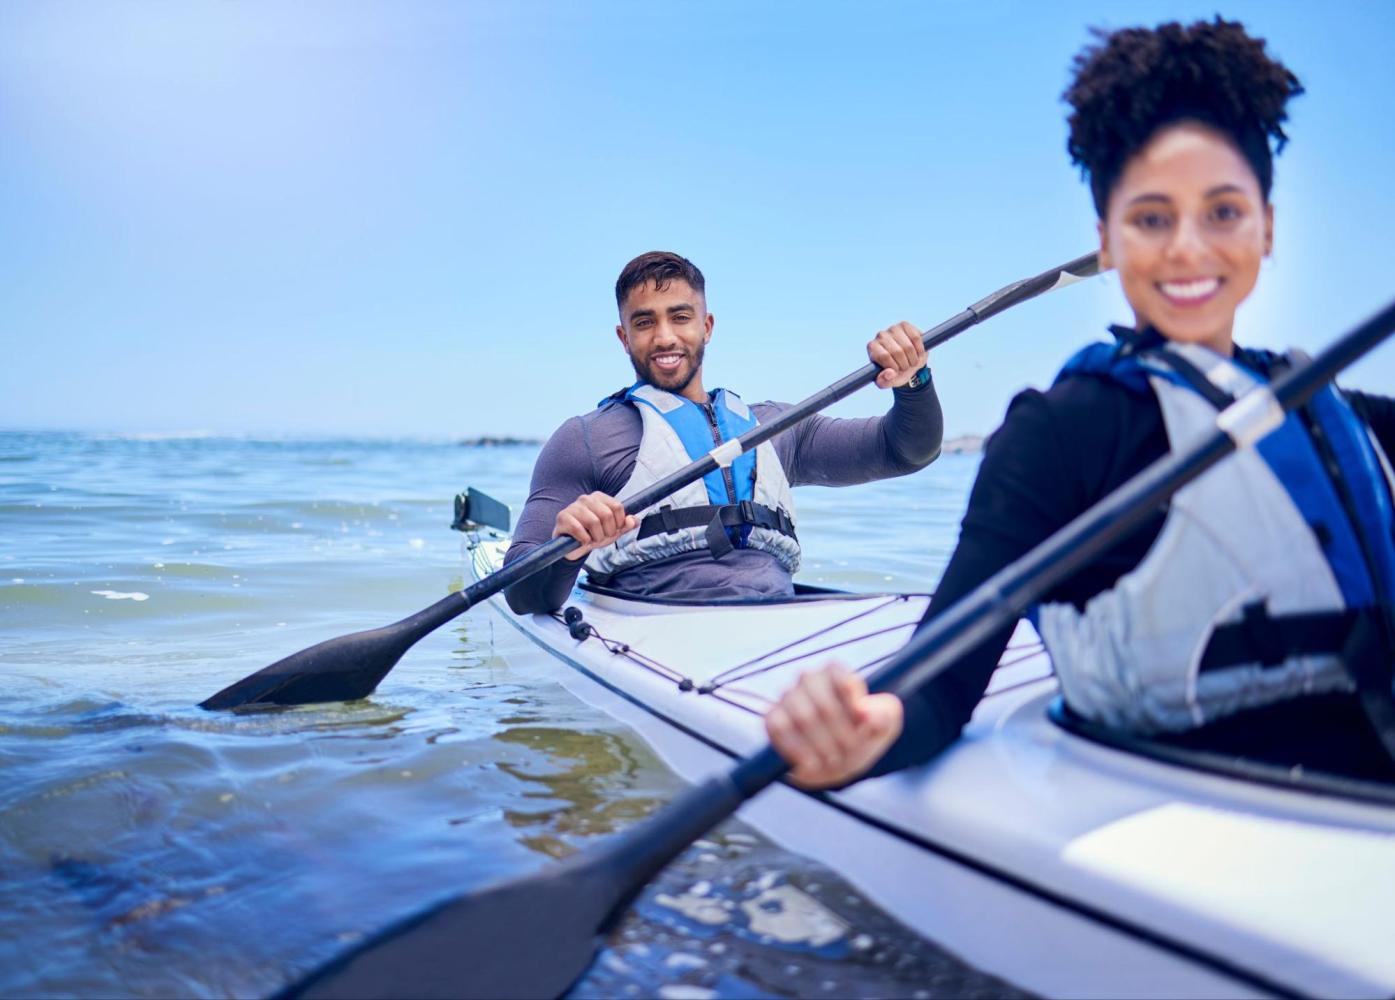 A couple with safety swimming vests smiles at the camera while kayaking.